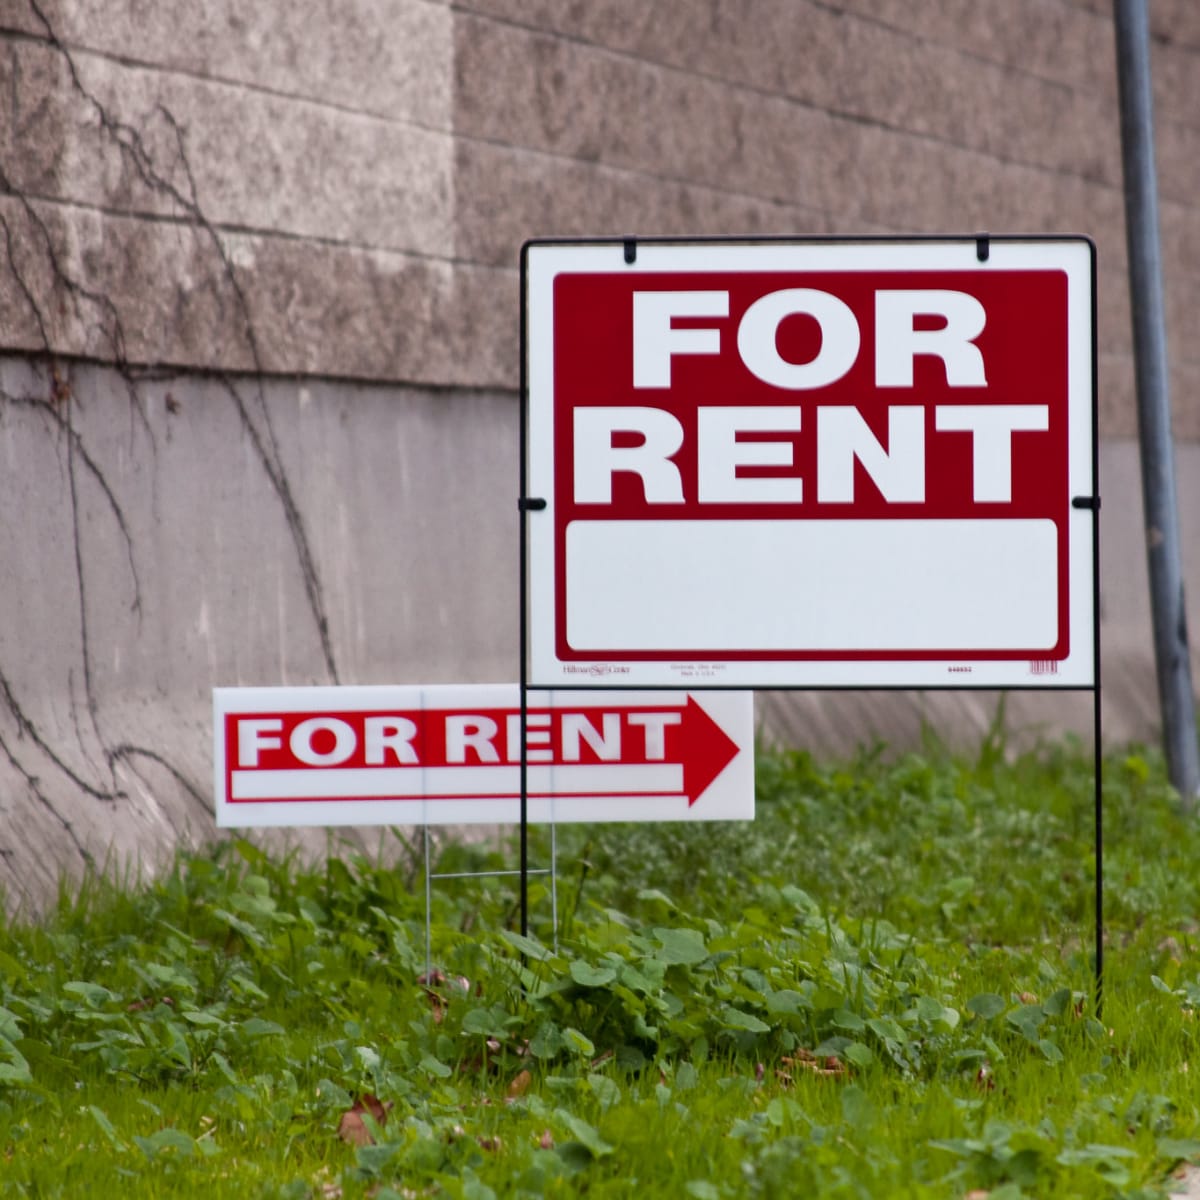 St. Paul rolls back part of its new rent control policy